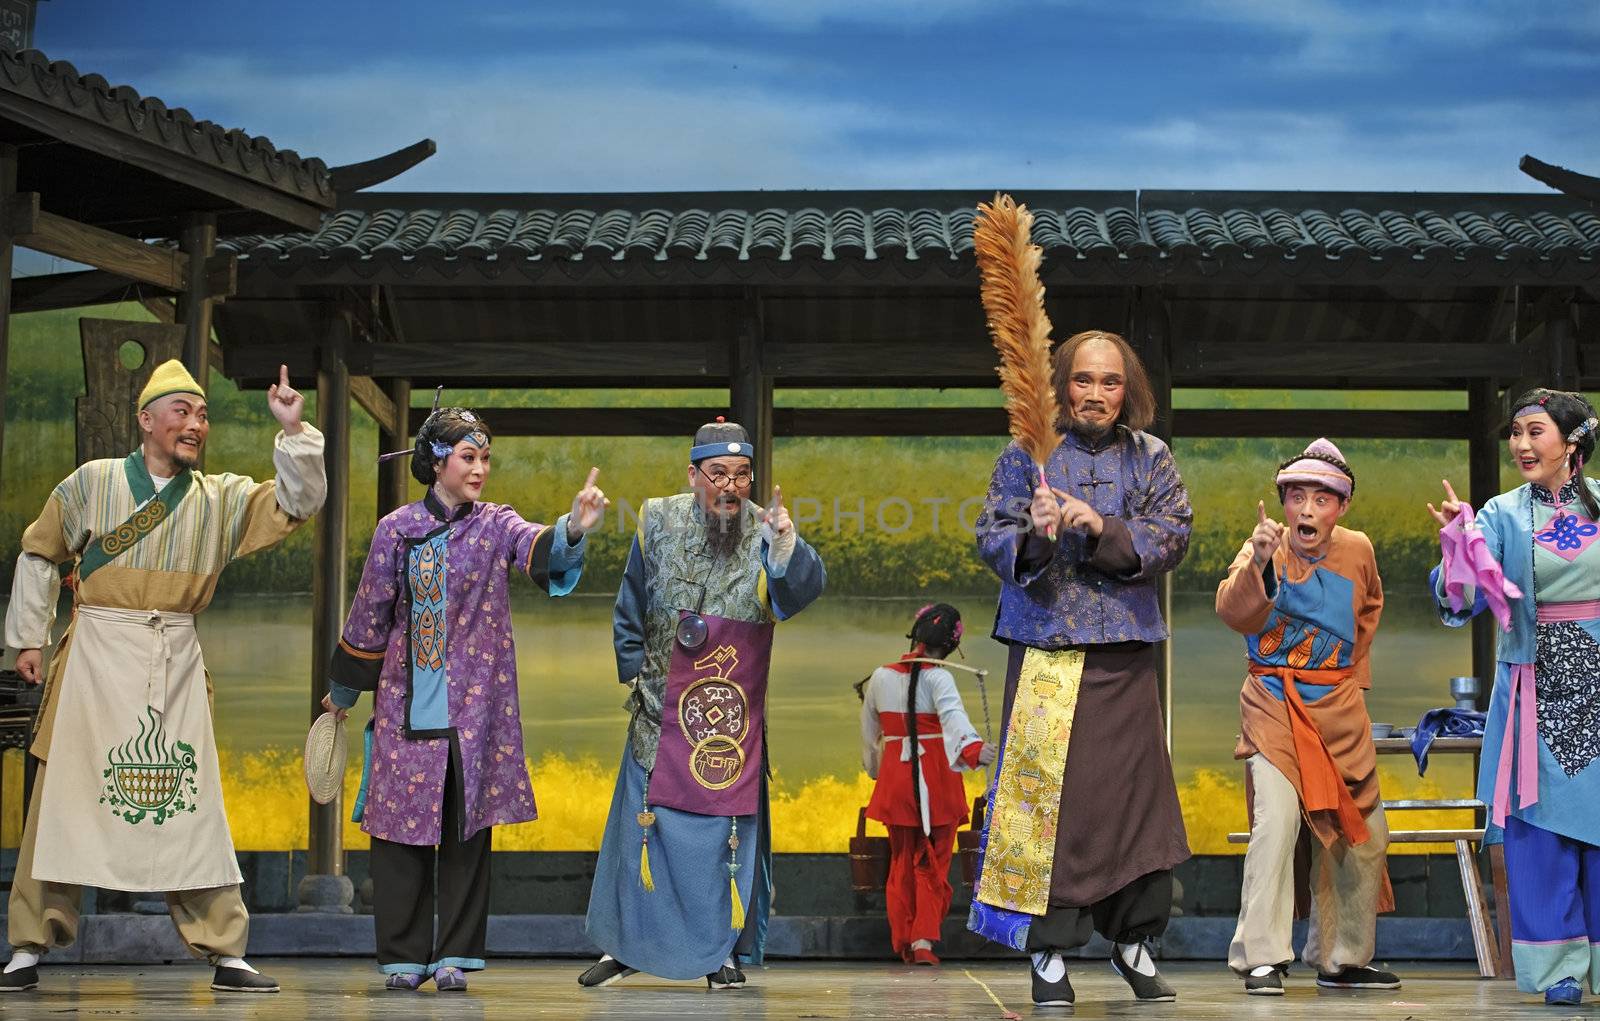 CHENGDU - JUN 7: Chinese Yue opera performer make a show on stage to compete for awards in 25th Chinese Drama Plum Blossom Award competition at Shengge theater.Jun 7, 2011 in Chengdu, China.
Chinese Drama Plum Blossom Award is the highest theatrical award in China.